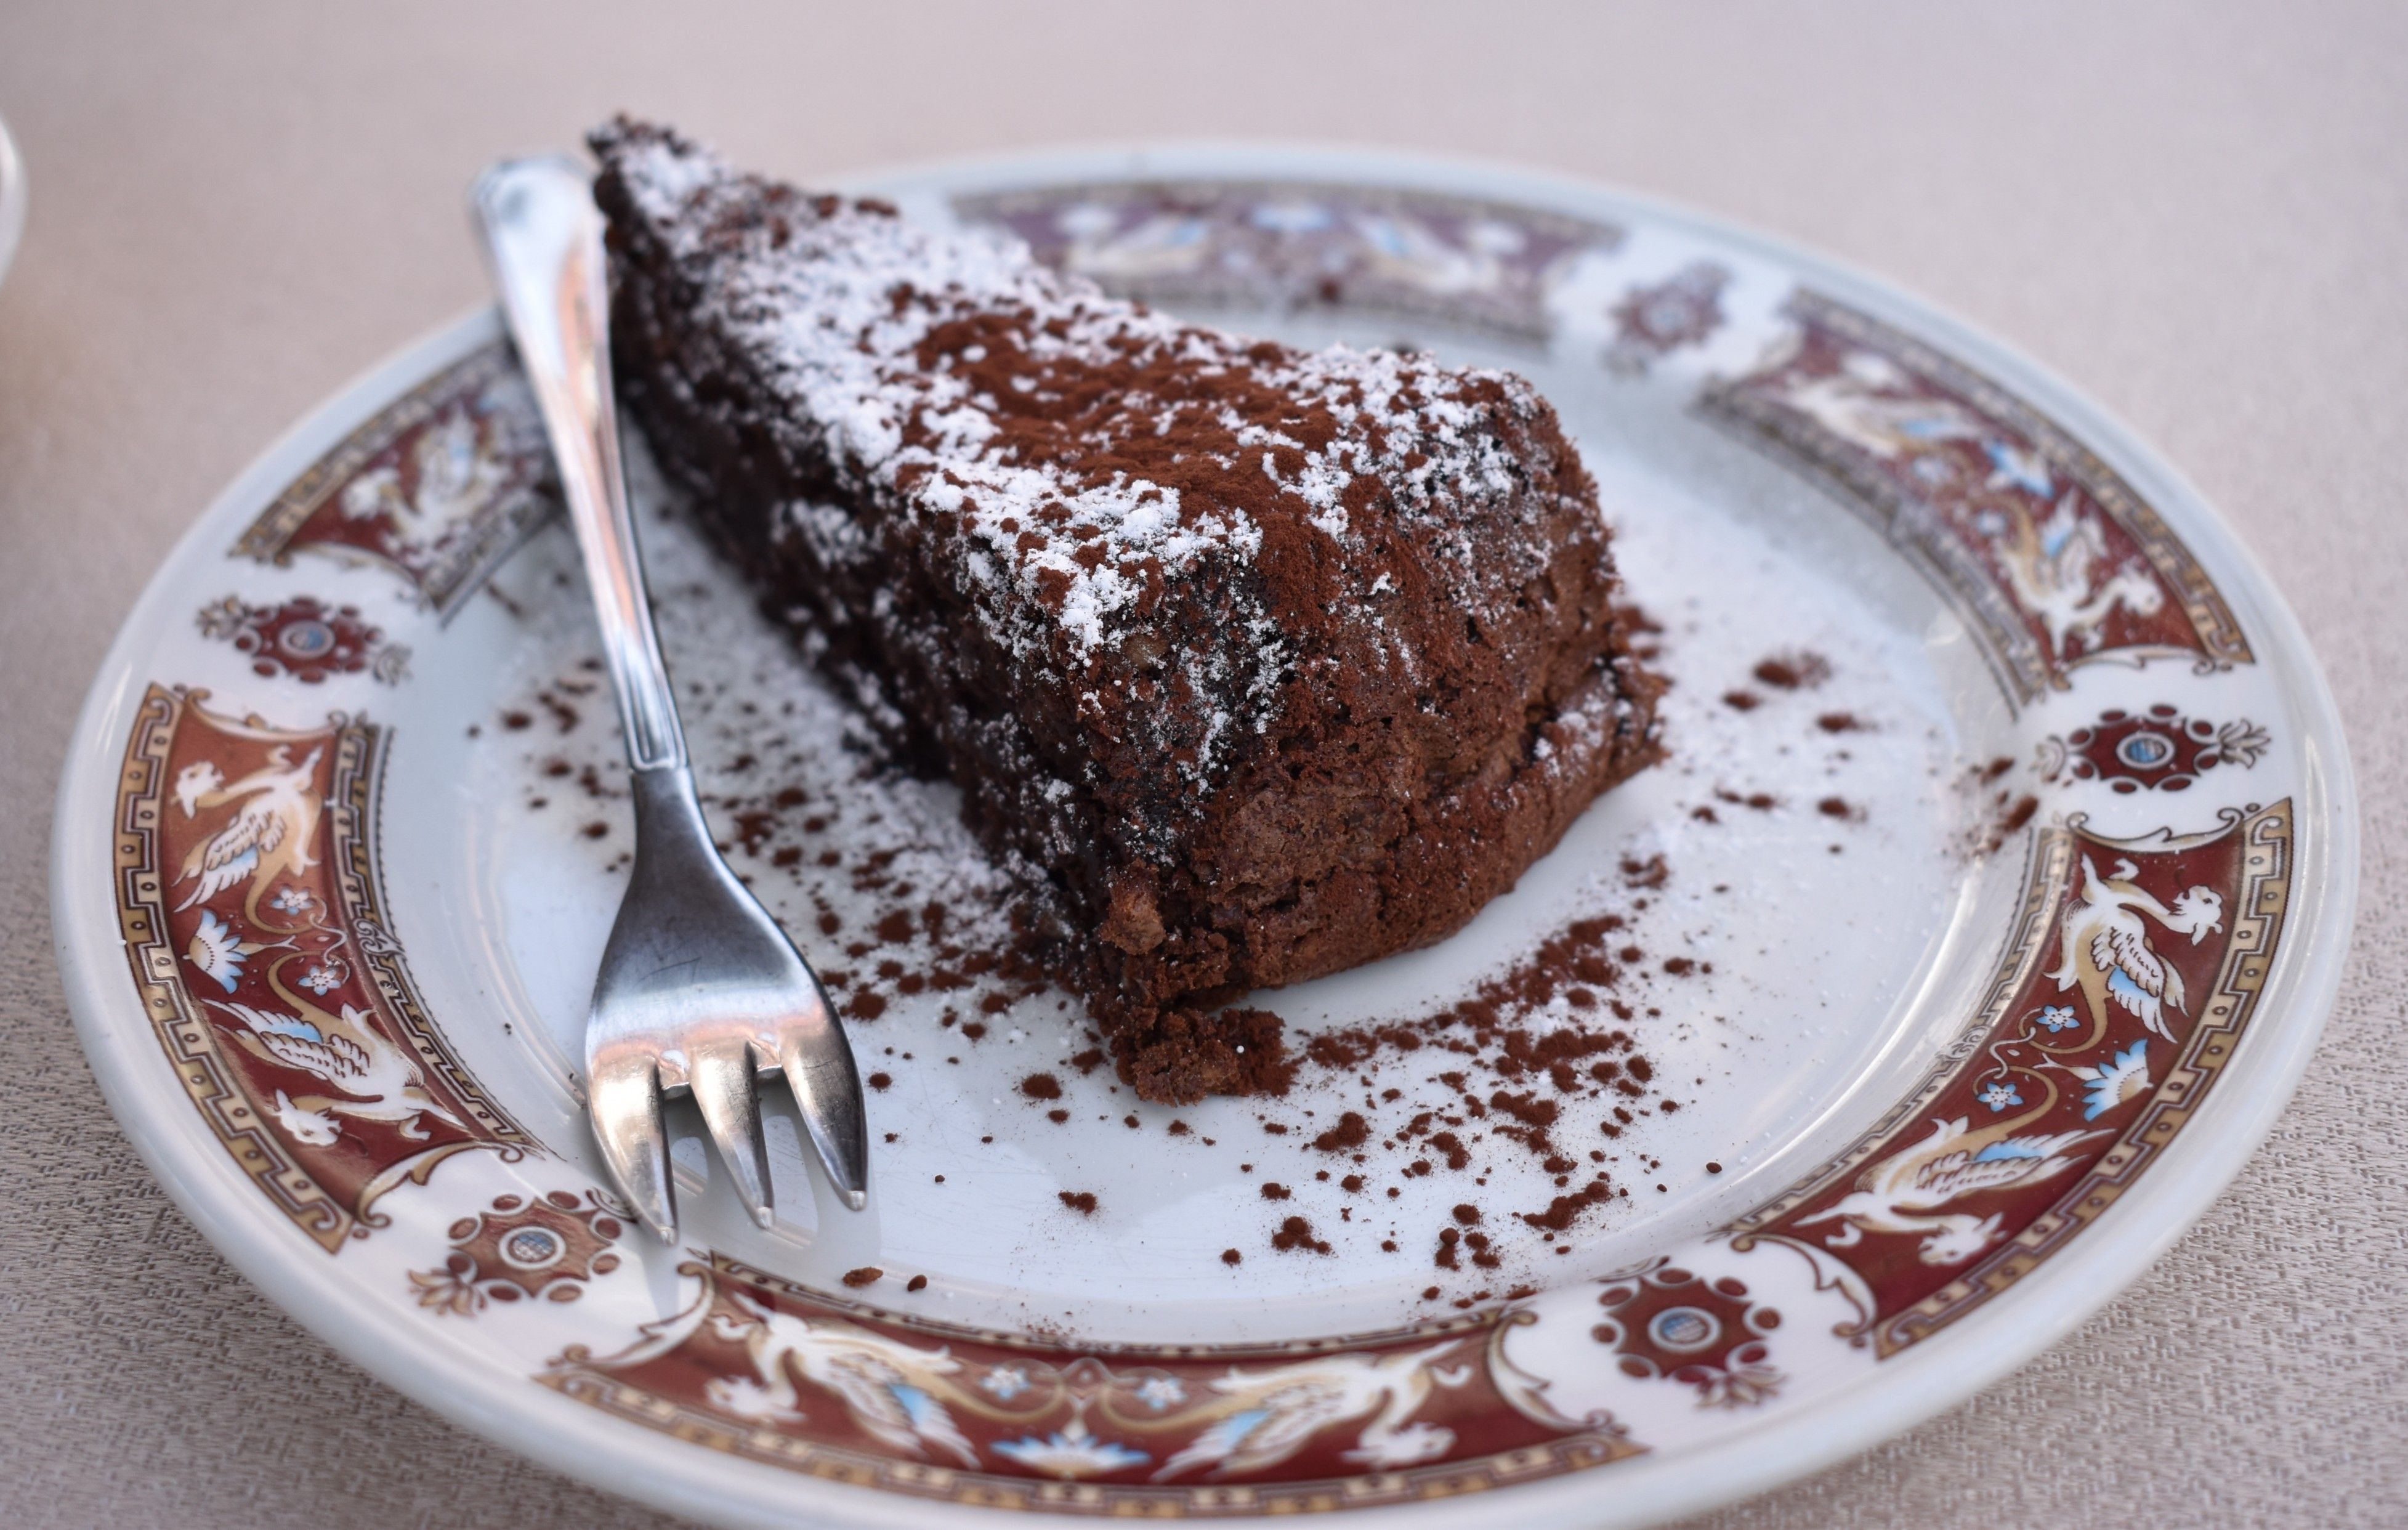 Caption: A photo of a piece of chocolate Torta Caprese cake, sprinkled with powdered sugar and cocoa, and served on a patterned plate with a fork on the side. (Local Guide @MoniDi)